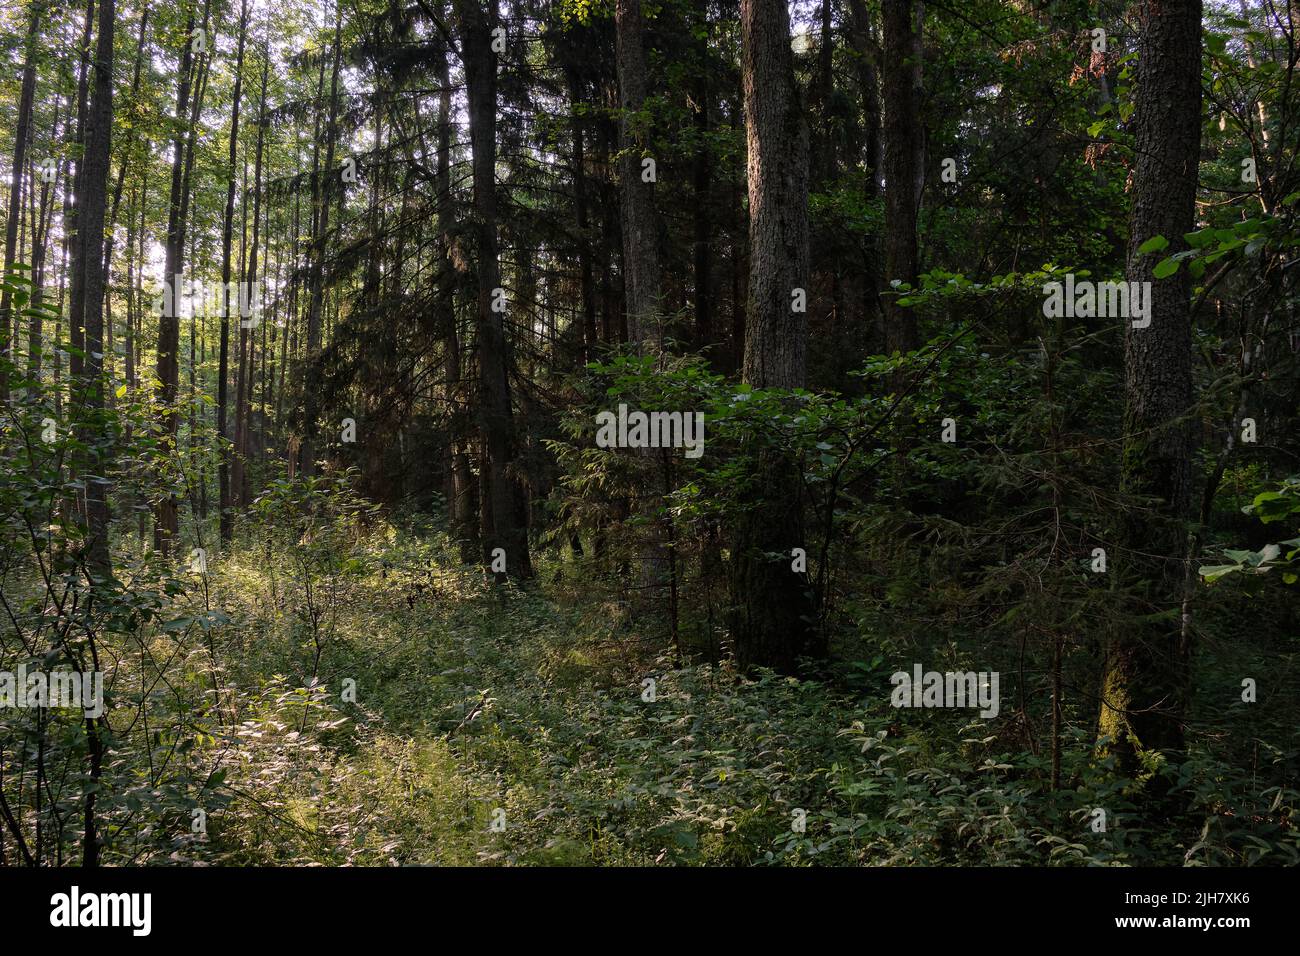 Frash Alder tree mixed forest in summertime morning with sunlight entering, Bialowieza Forest, Poland, Europe Stock Photo